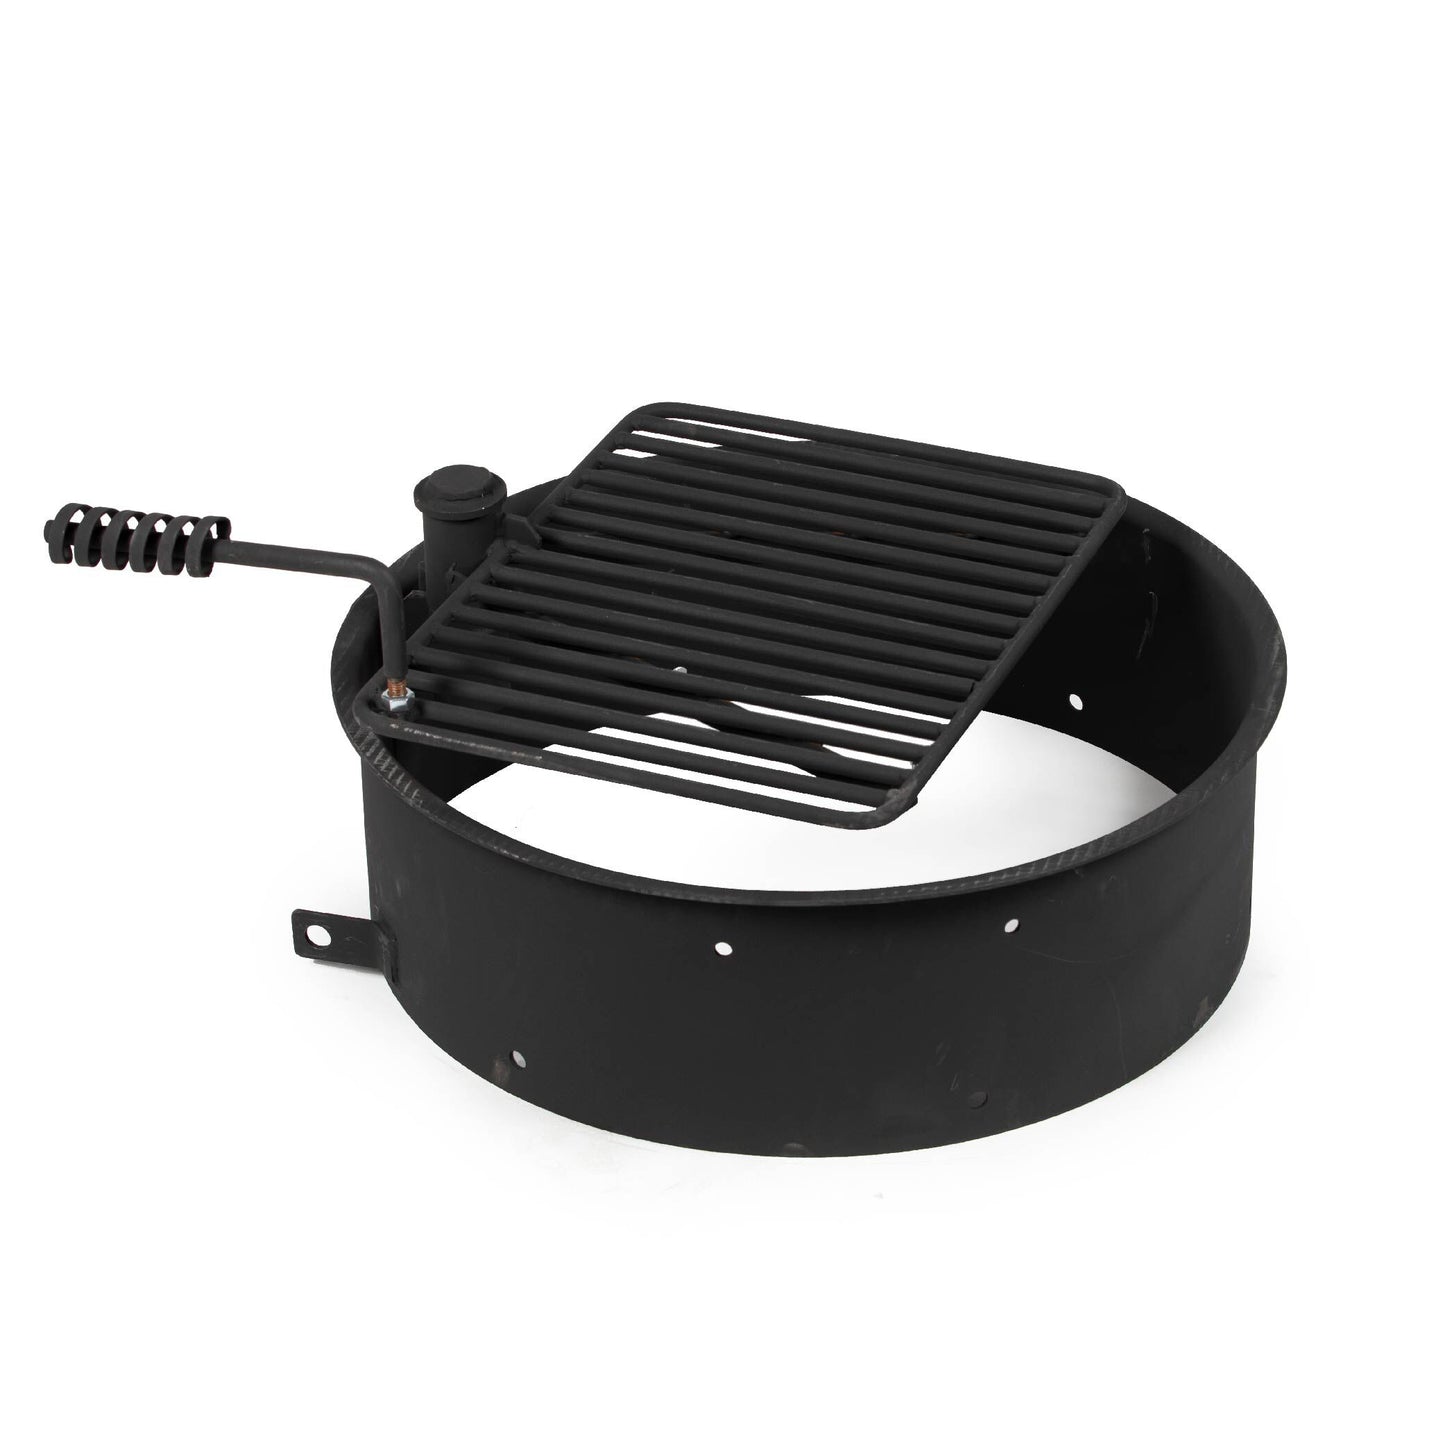 Steel Camp Fire Ring & Outdoor Cooking Grate - Fire Ring Size: 24" | 24" - view 1